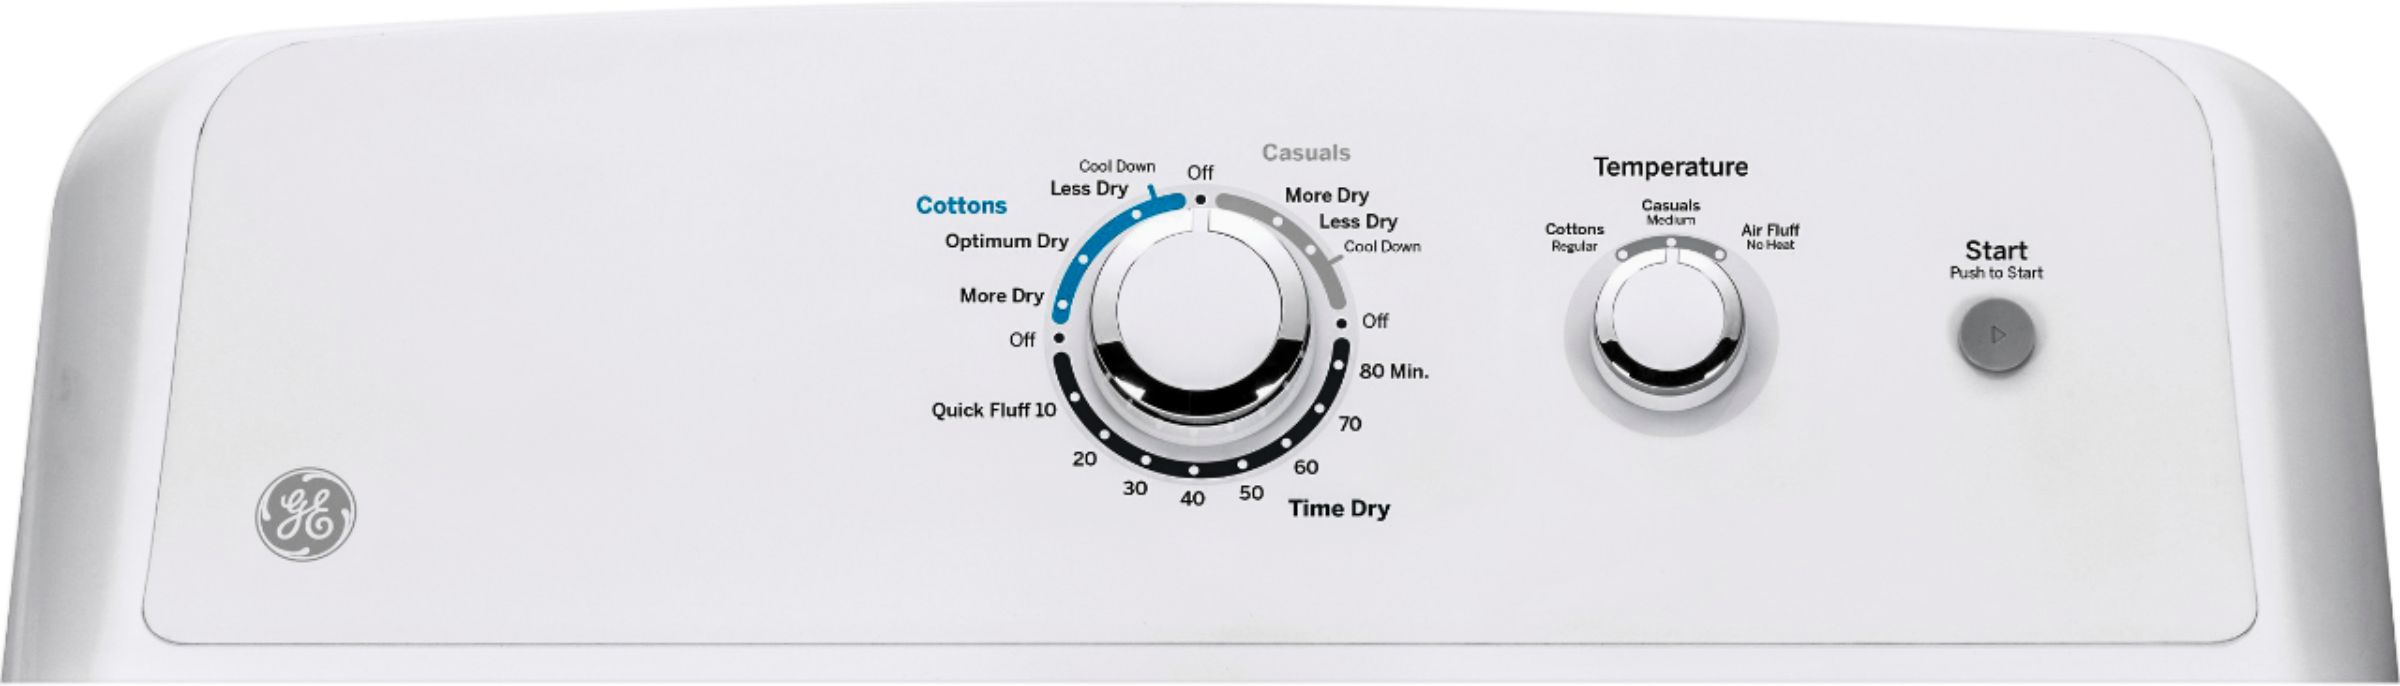 Angle View: Hotpoint - 6.2 Cu. Ft. 4-Cycle Electric Dryer - White with gray backsplash